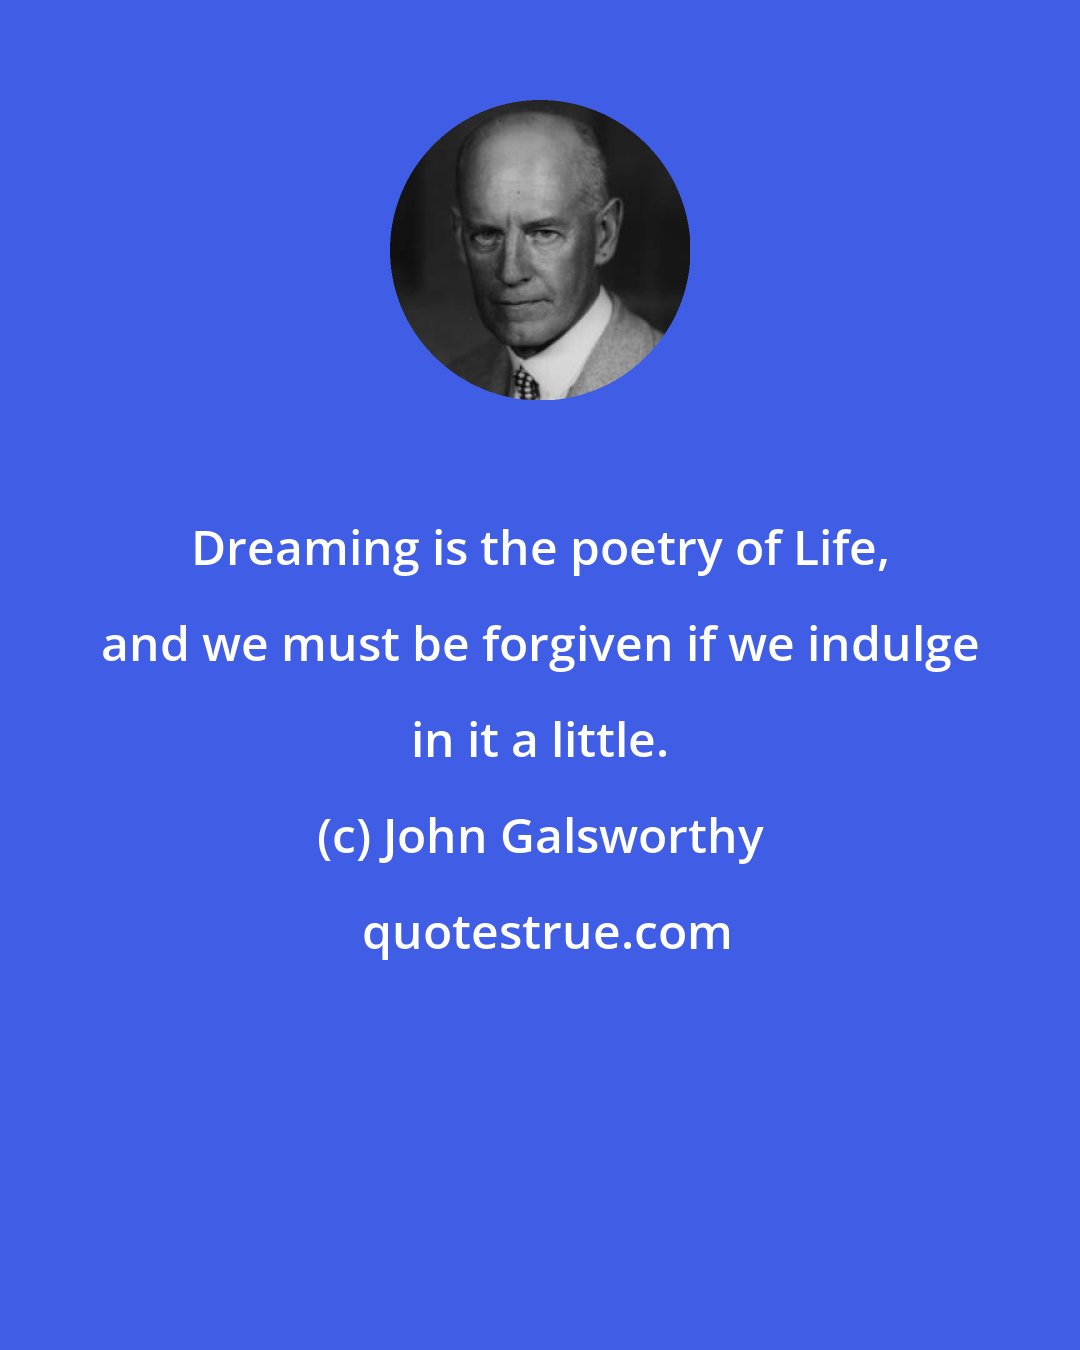 John Galsworthy: Dreaming is the poetry of Life, and we must be forgiven if we indulge in it a little.